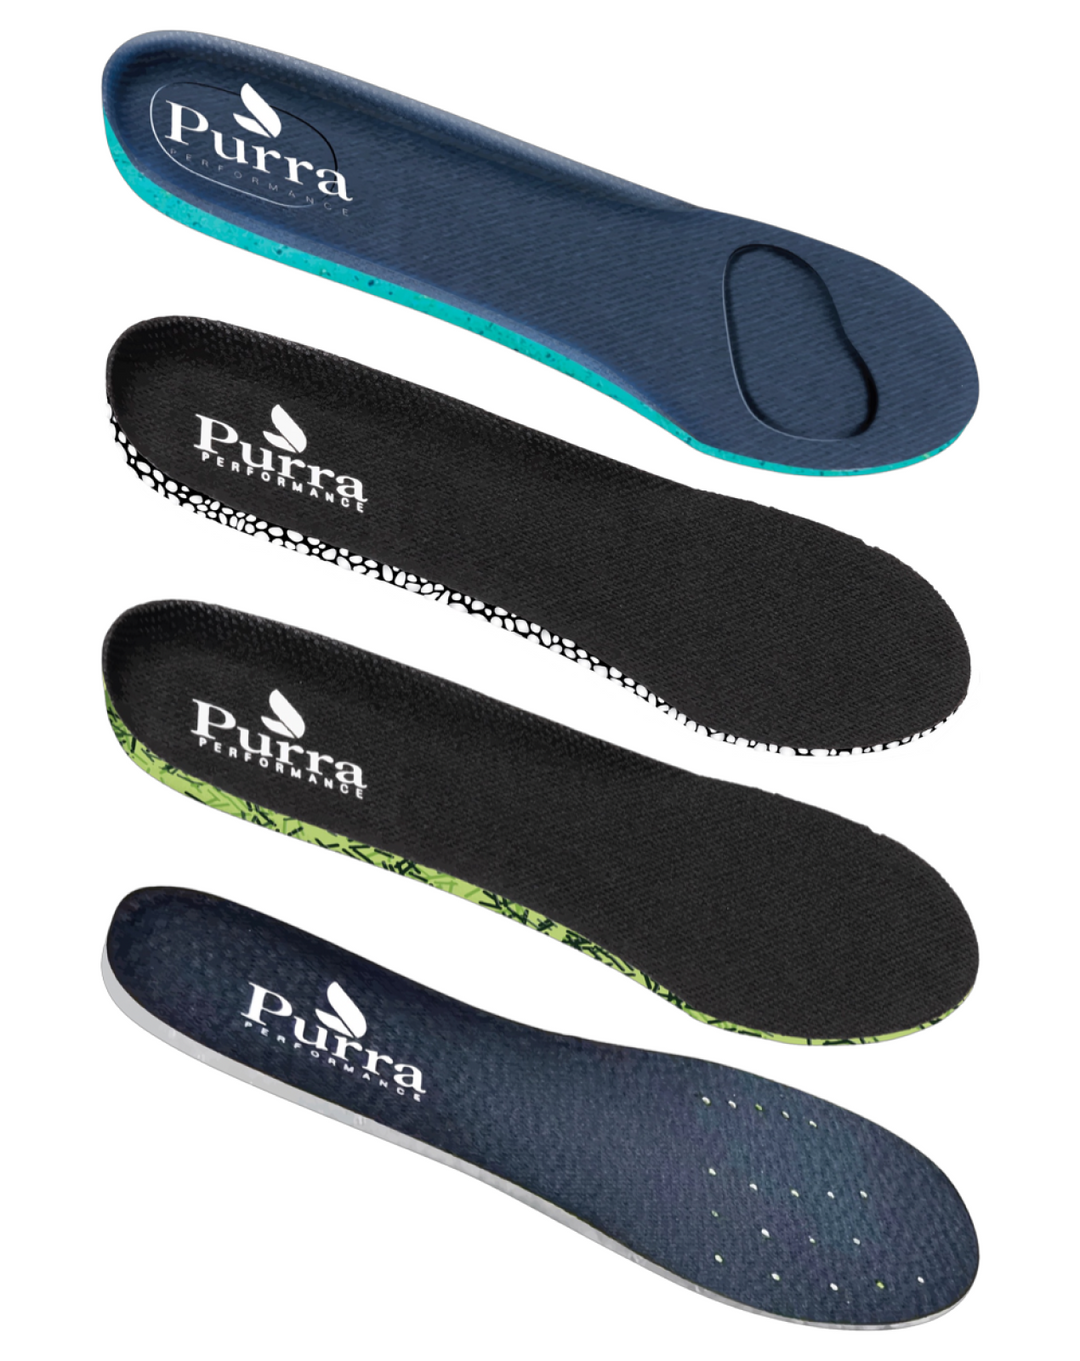 A combined view of all the insoles that Purra manufactures stacked on above the other on a white background.